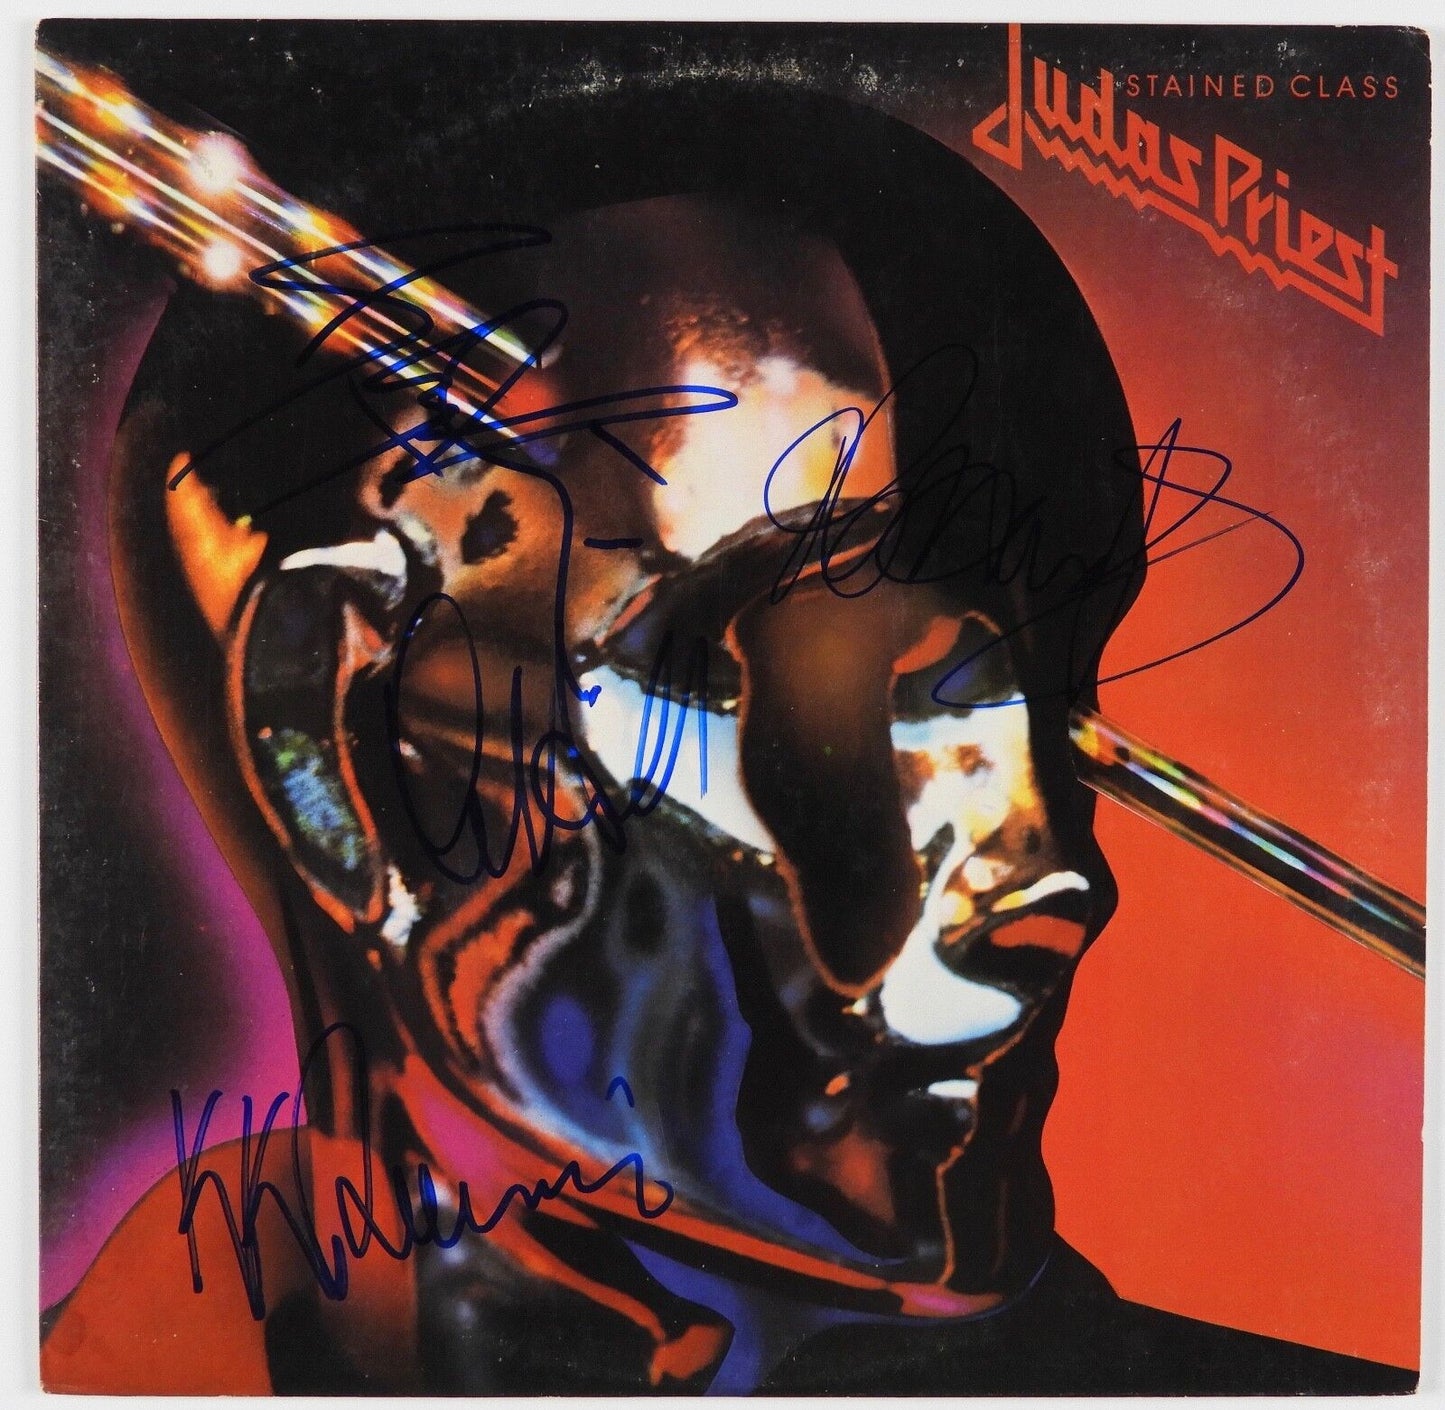 Judas Priest Stained Class Band Signed Autograph Record Album JSA Vinyl